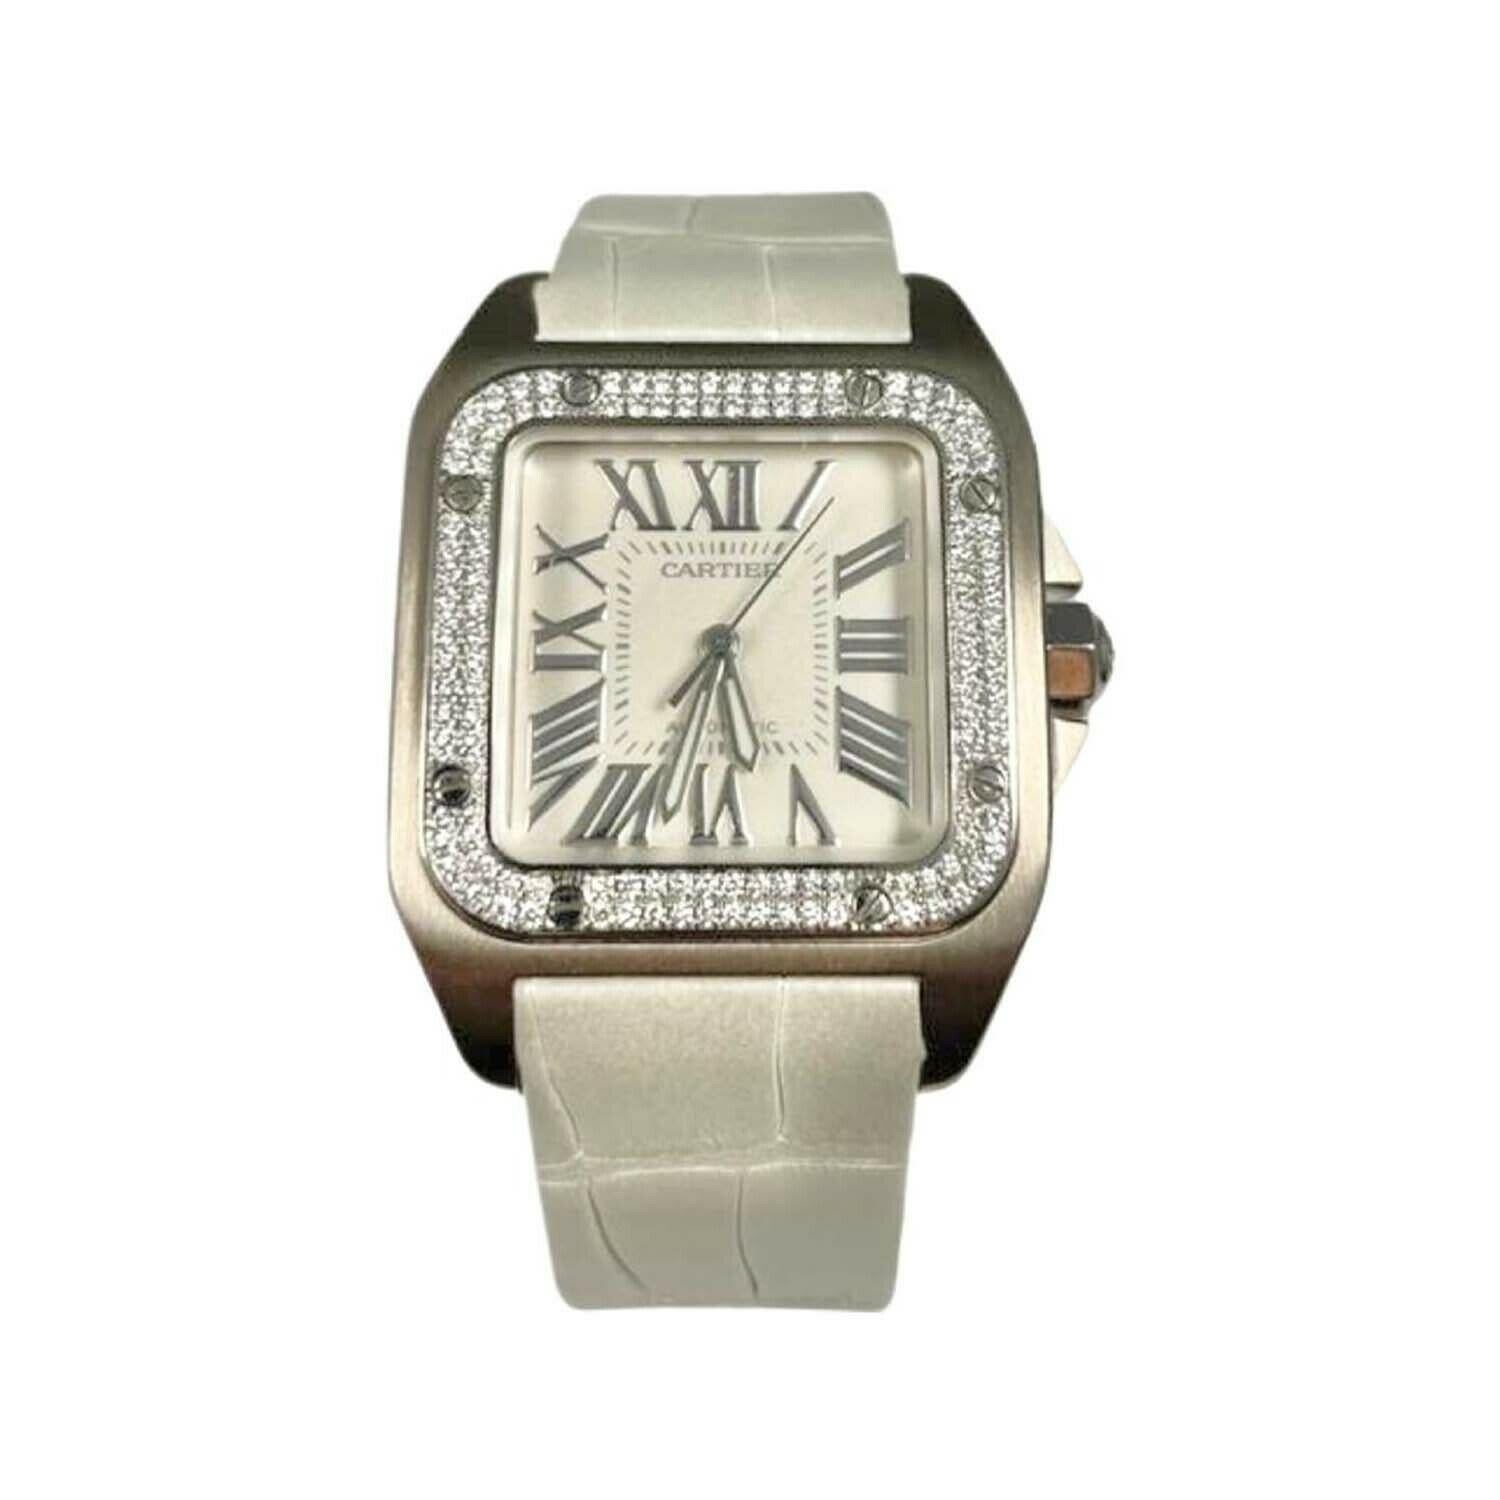 ITEM SPECIFICATIONS:

Brand: Cartier

Model Name: Santos 100

Model Number: 2881

Movement: Automatic

Case Size: 33 mm

Case Back: Closed

Case Material: 18k White Gold

Bezel: Diamonds

Dial: White/Silverish

Bracelet: Leather

Hour Markers: Roman